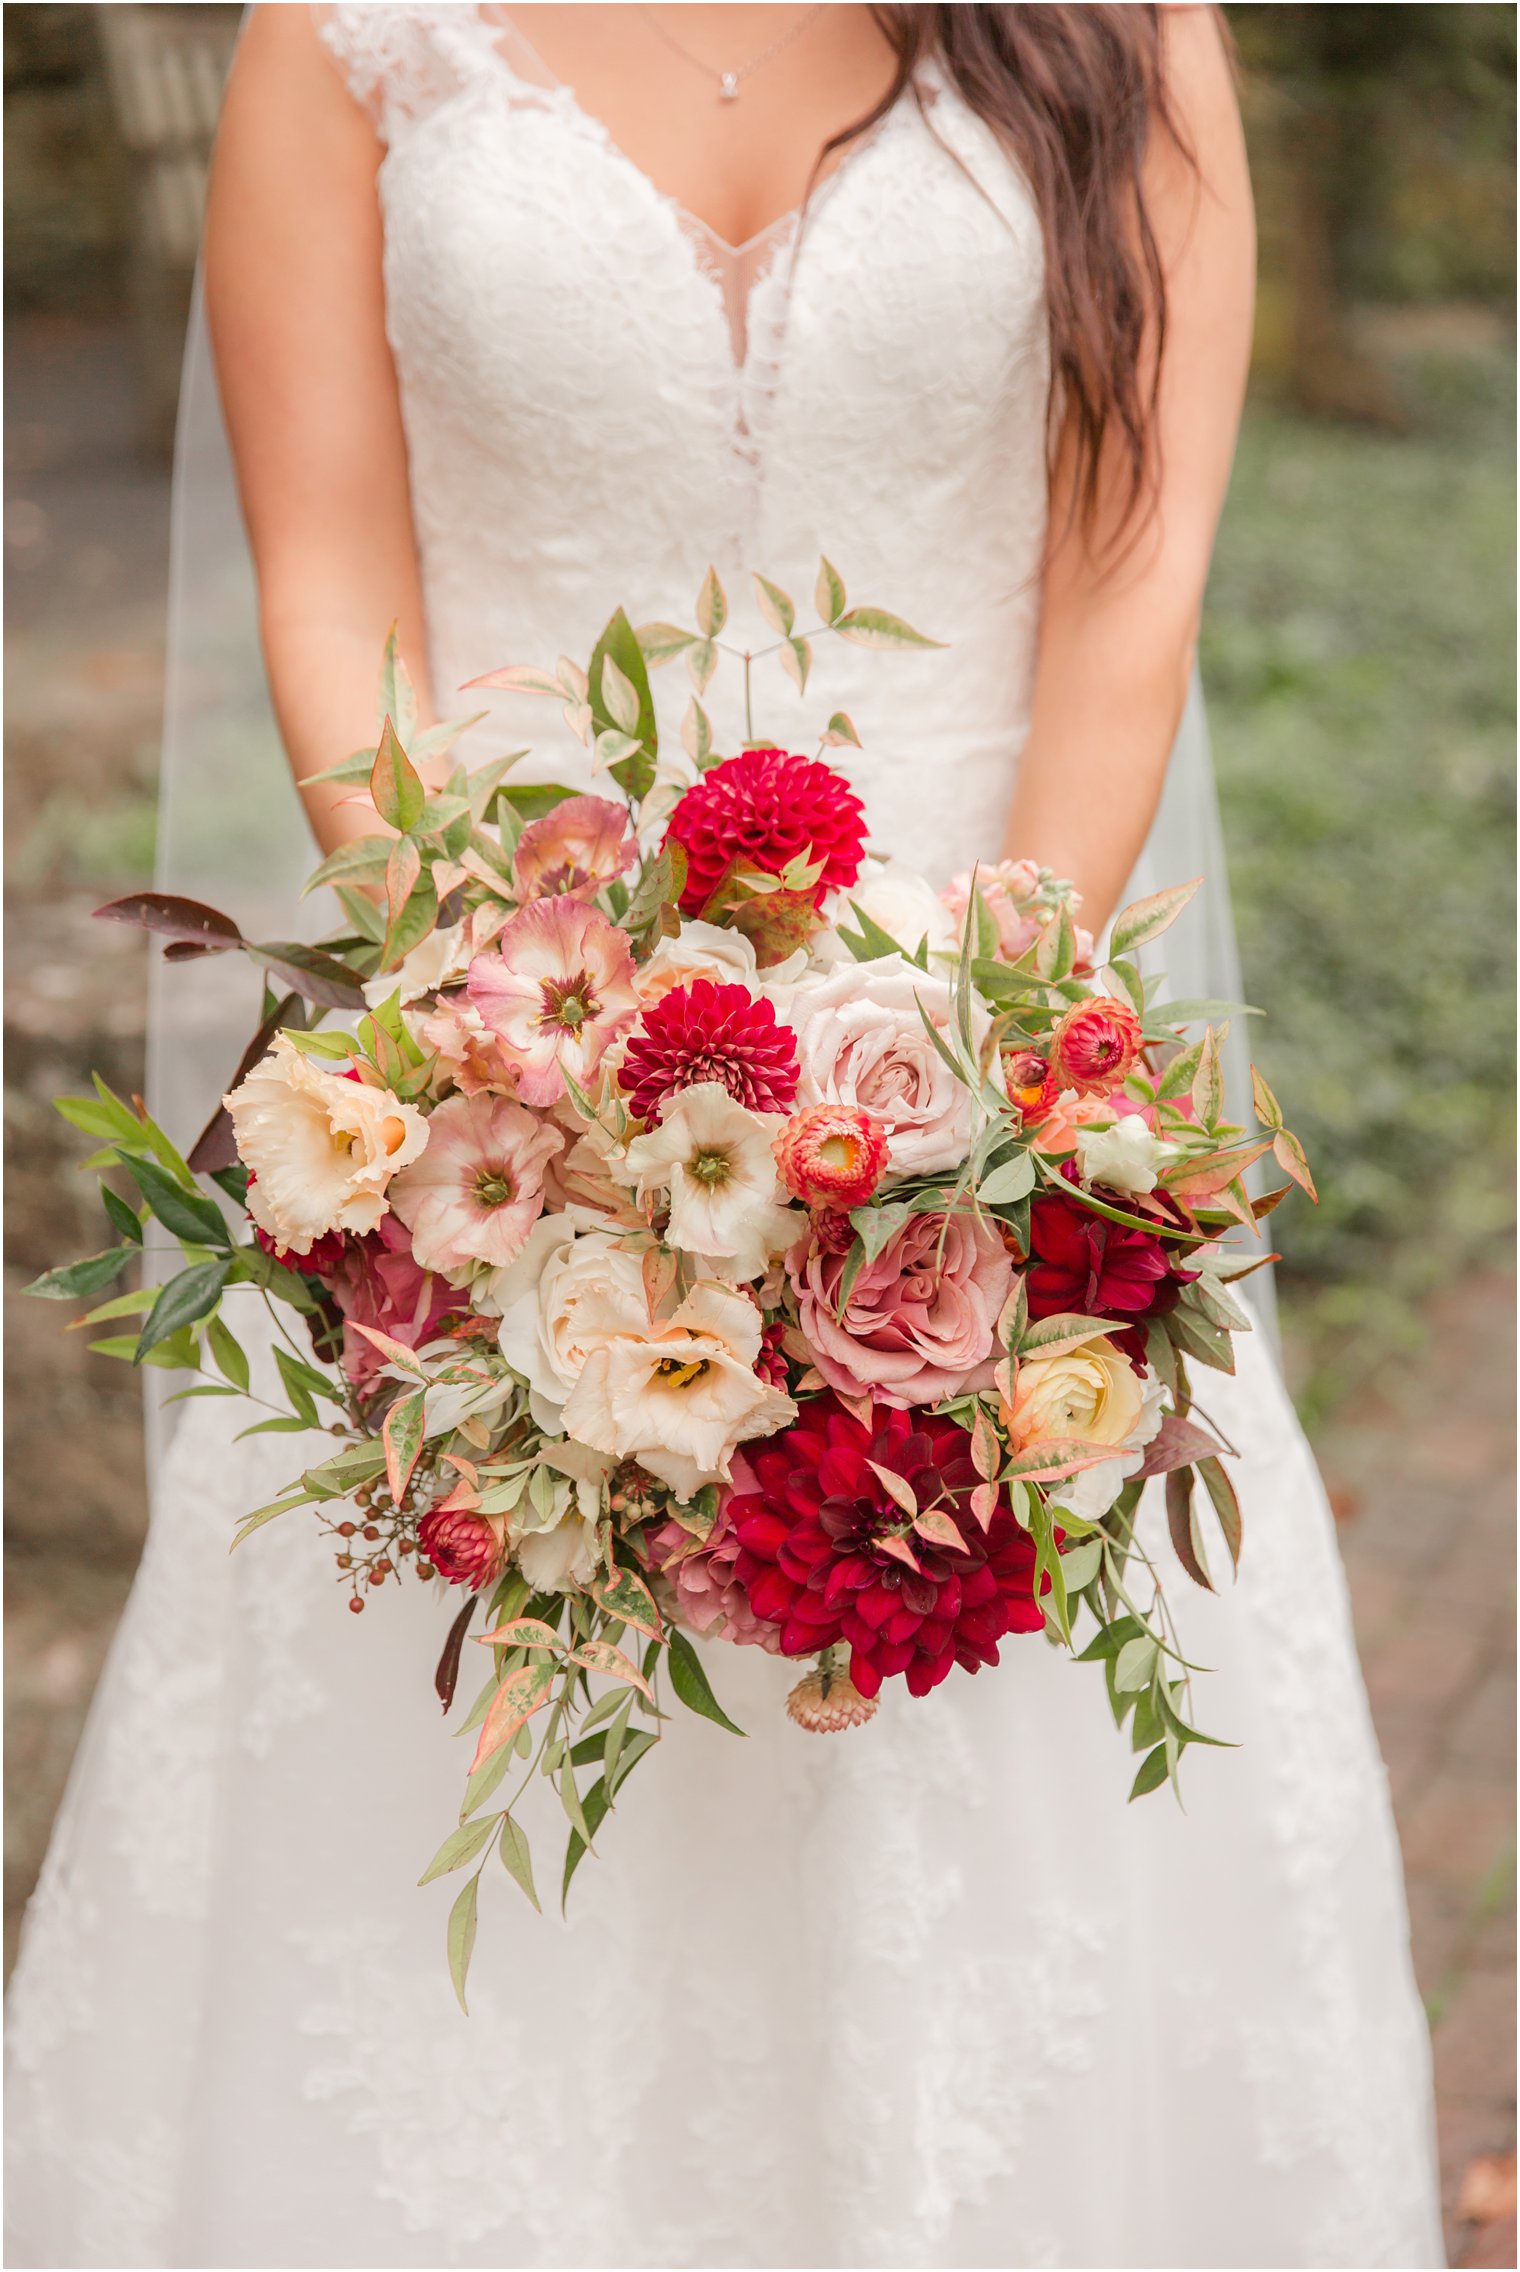 bright red, ivory and peach bouquet by Blue Jasmine Design photographed by Idalia Photography